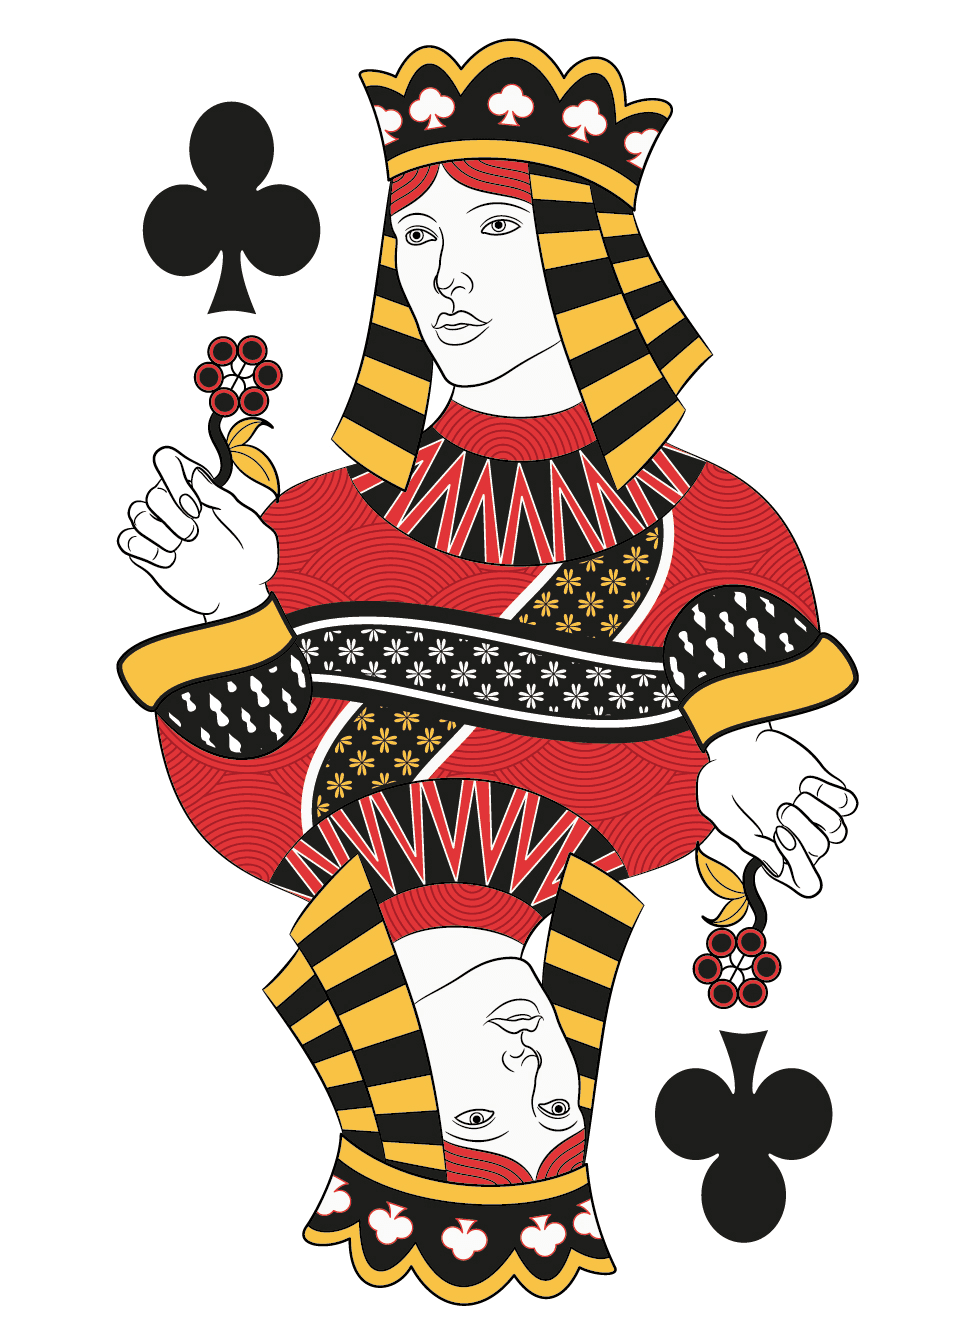 Queen of Clubs - English